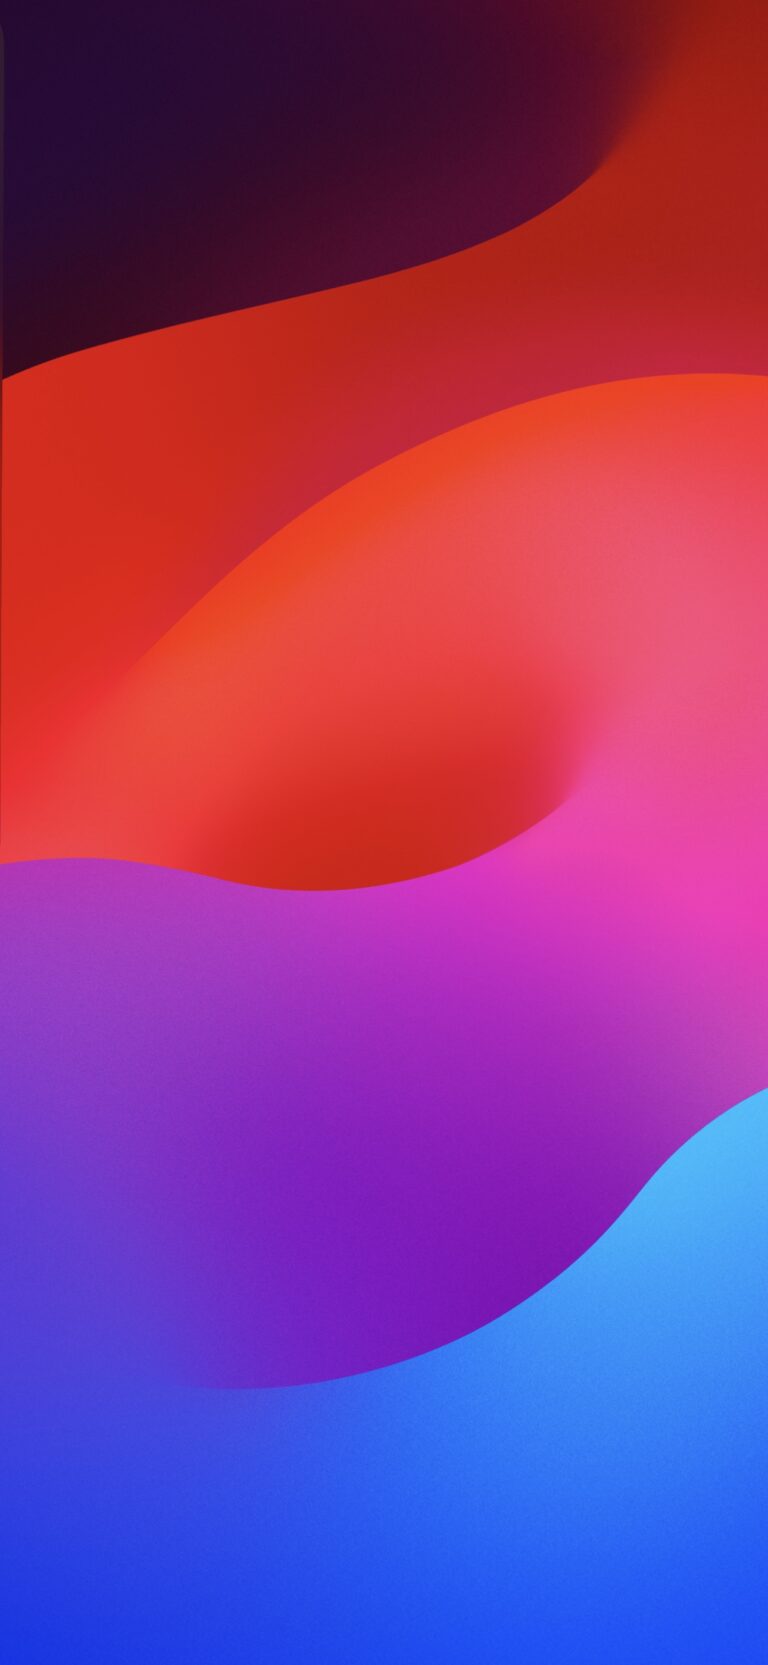 Get the iOS 17 Default Wallpapers Here